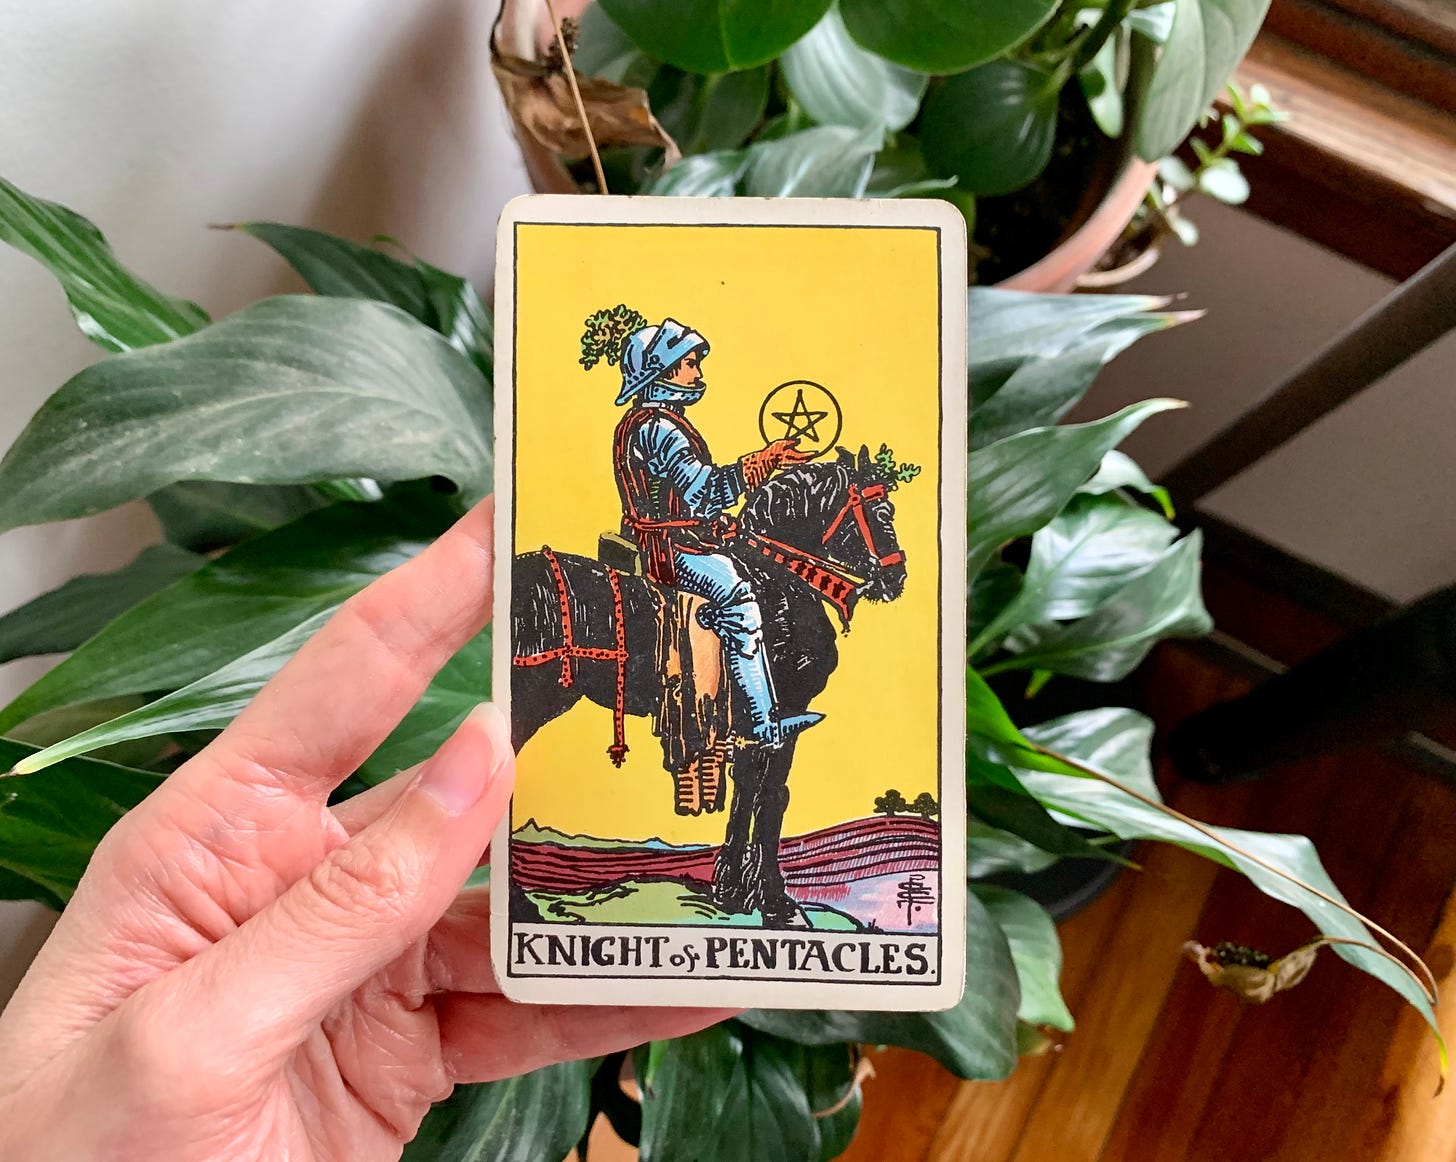 A hand is holding a tarot card, knight of pentacles by Pamela Colman Smith for the Rider Waite Smith Tarot. In the image a person is sitting in full armor on a black horse overlooking a field that looks ready for growing season. The person is holding a pentacle. Behind the card are houseplants, light is coming in from a window.